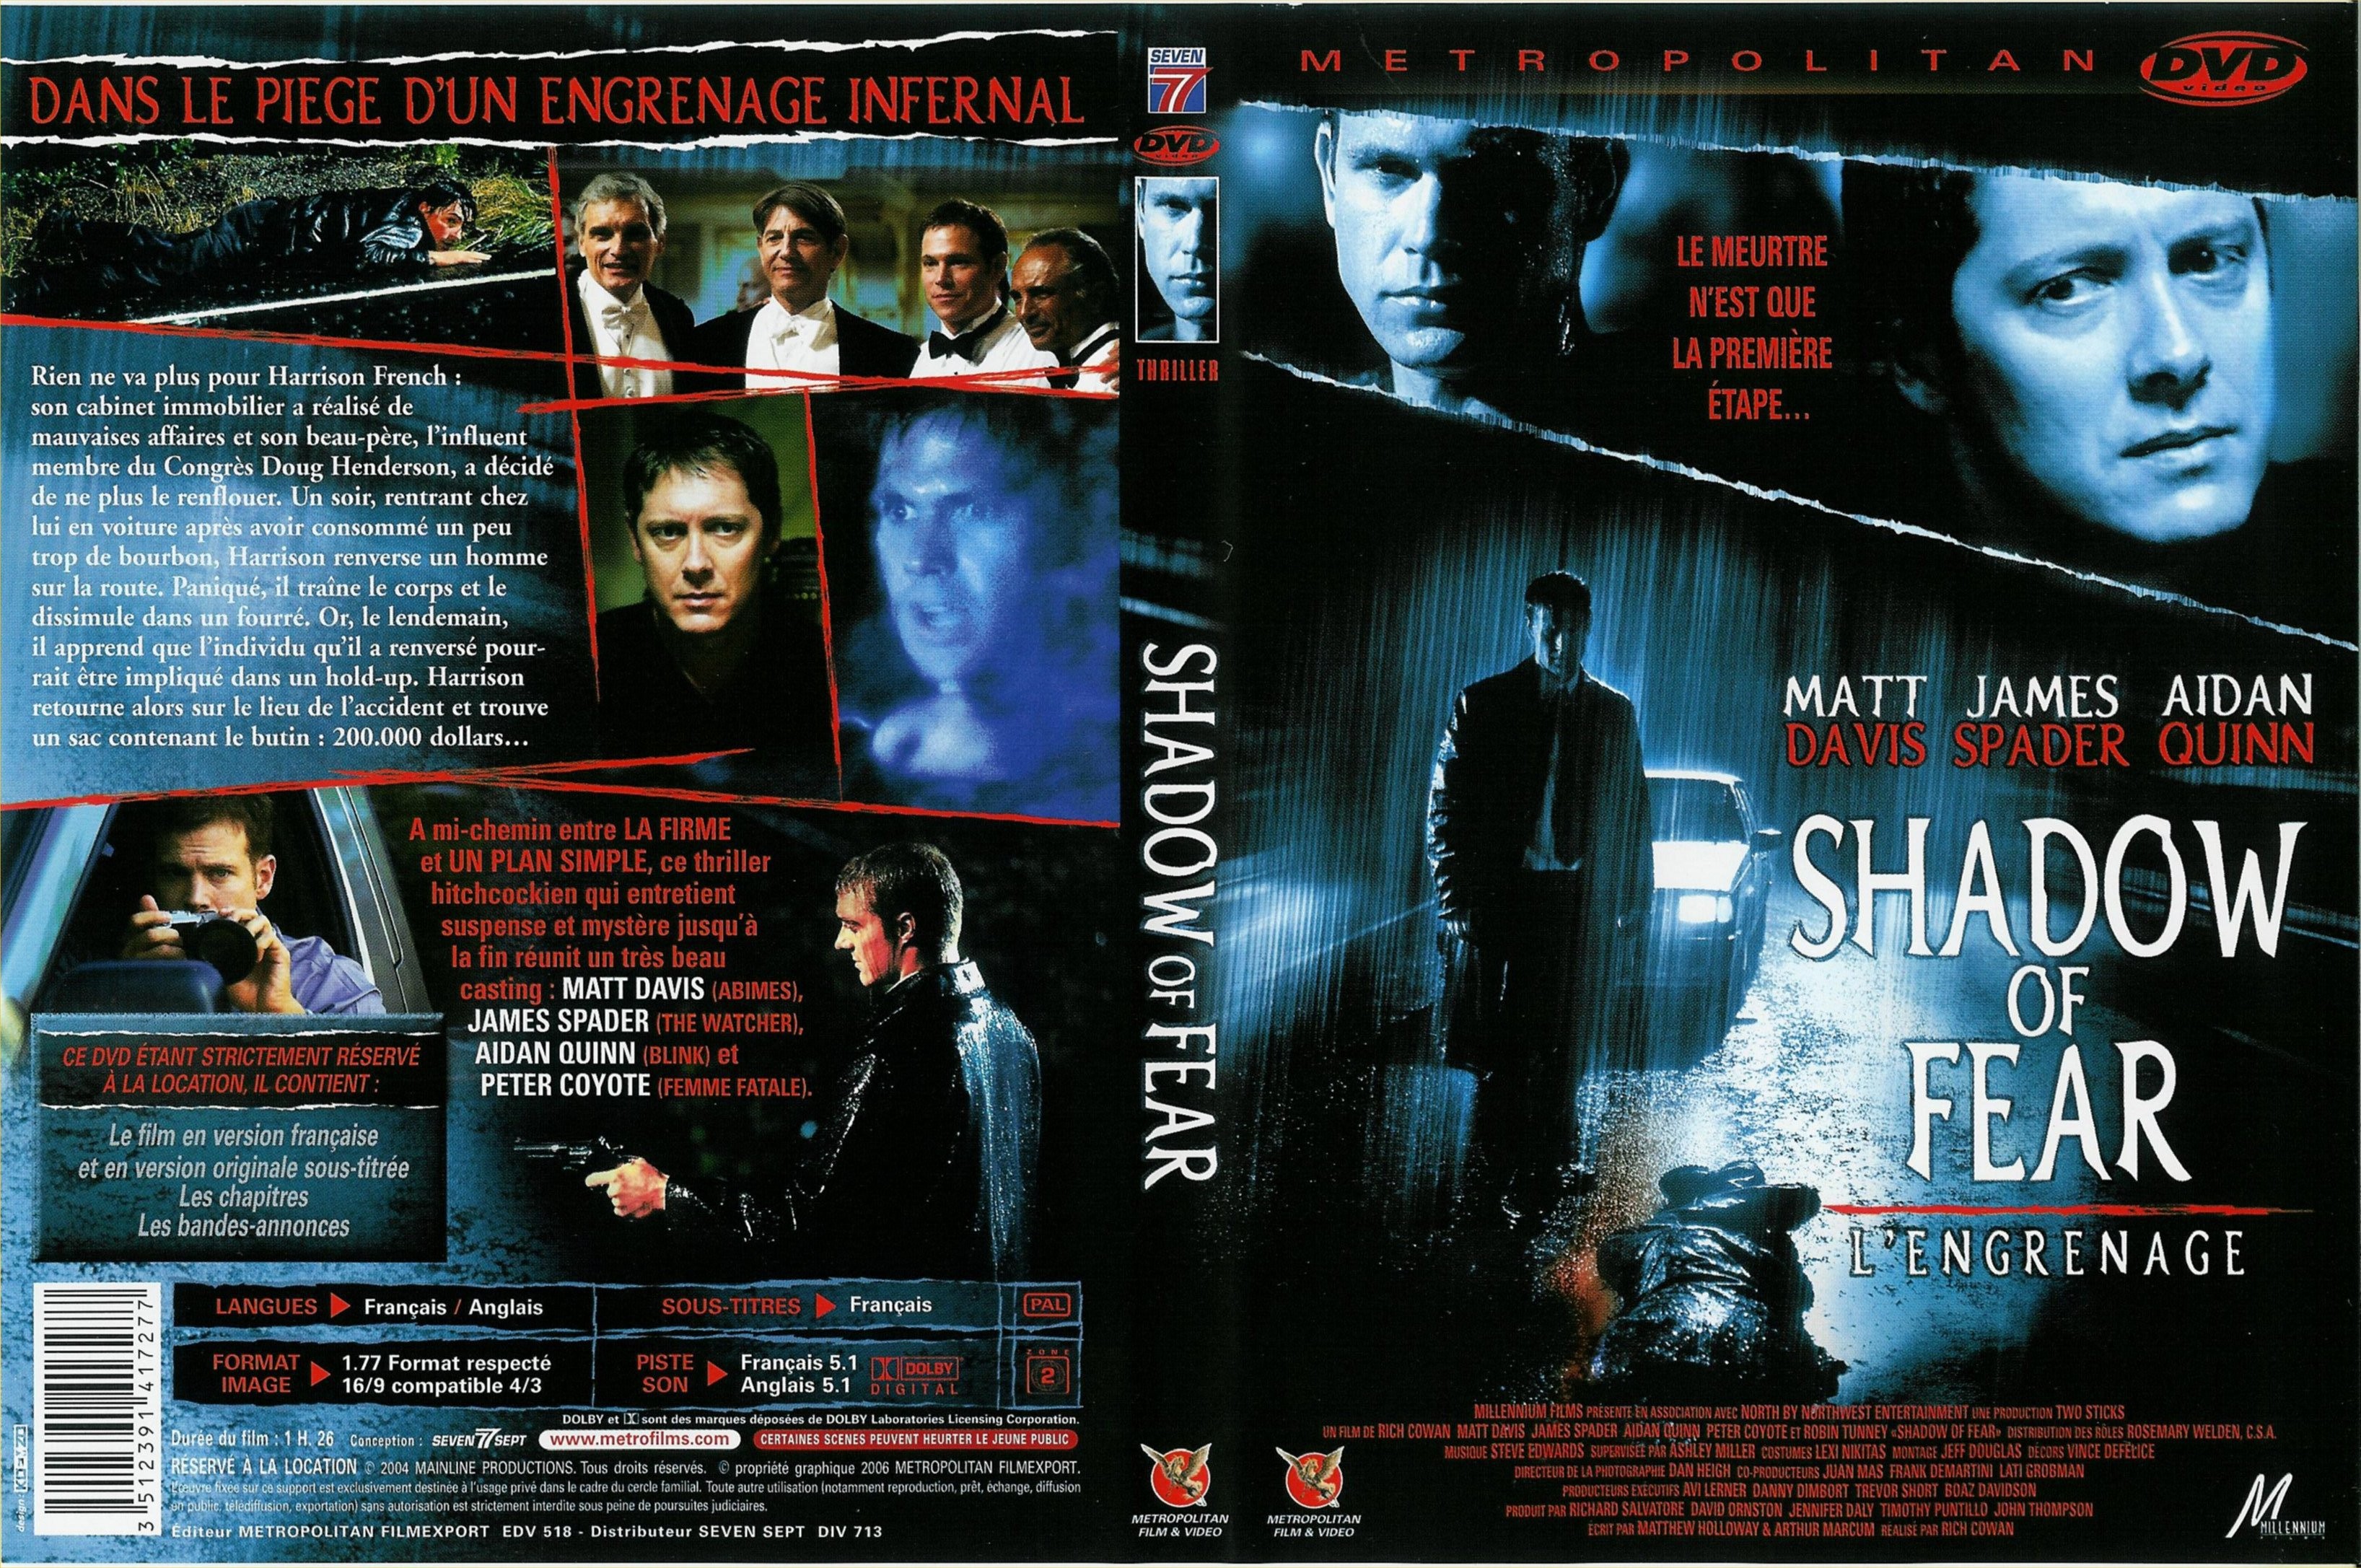 Jaquette DVD Shadow of fear